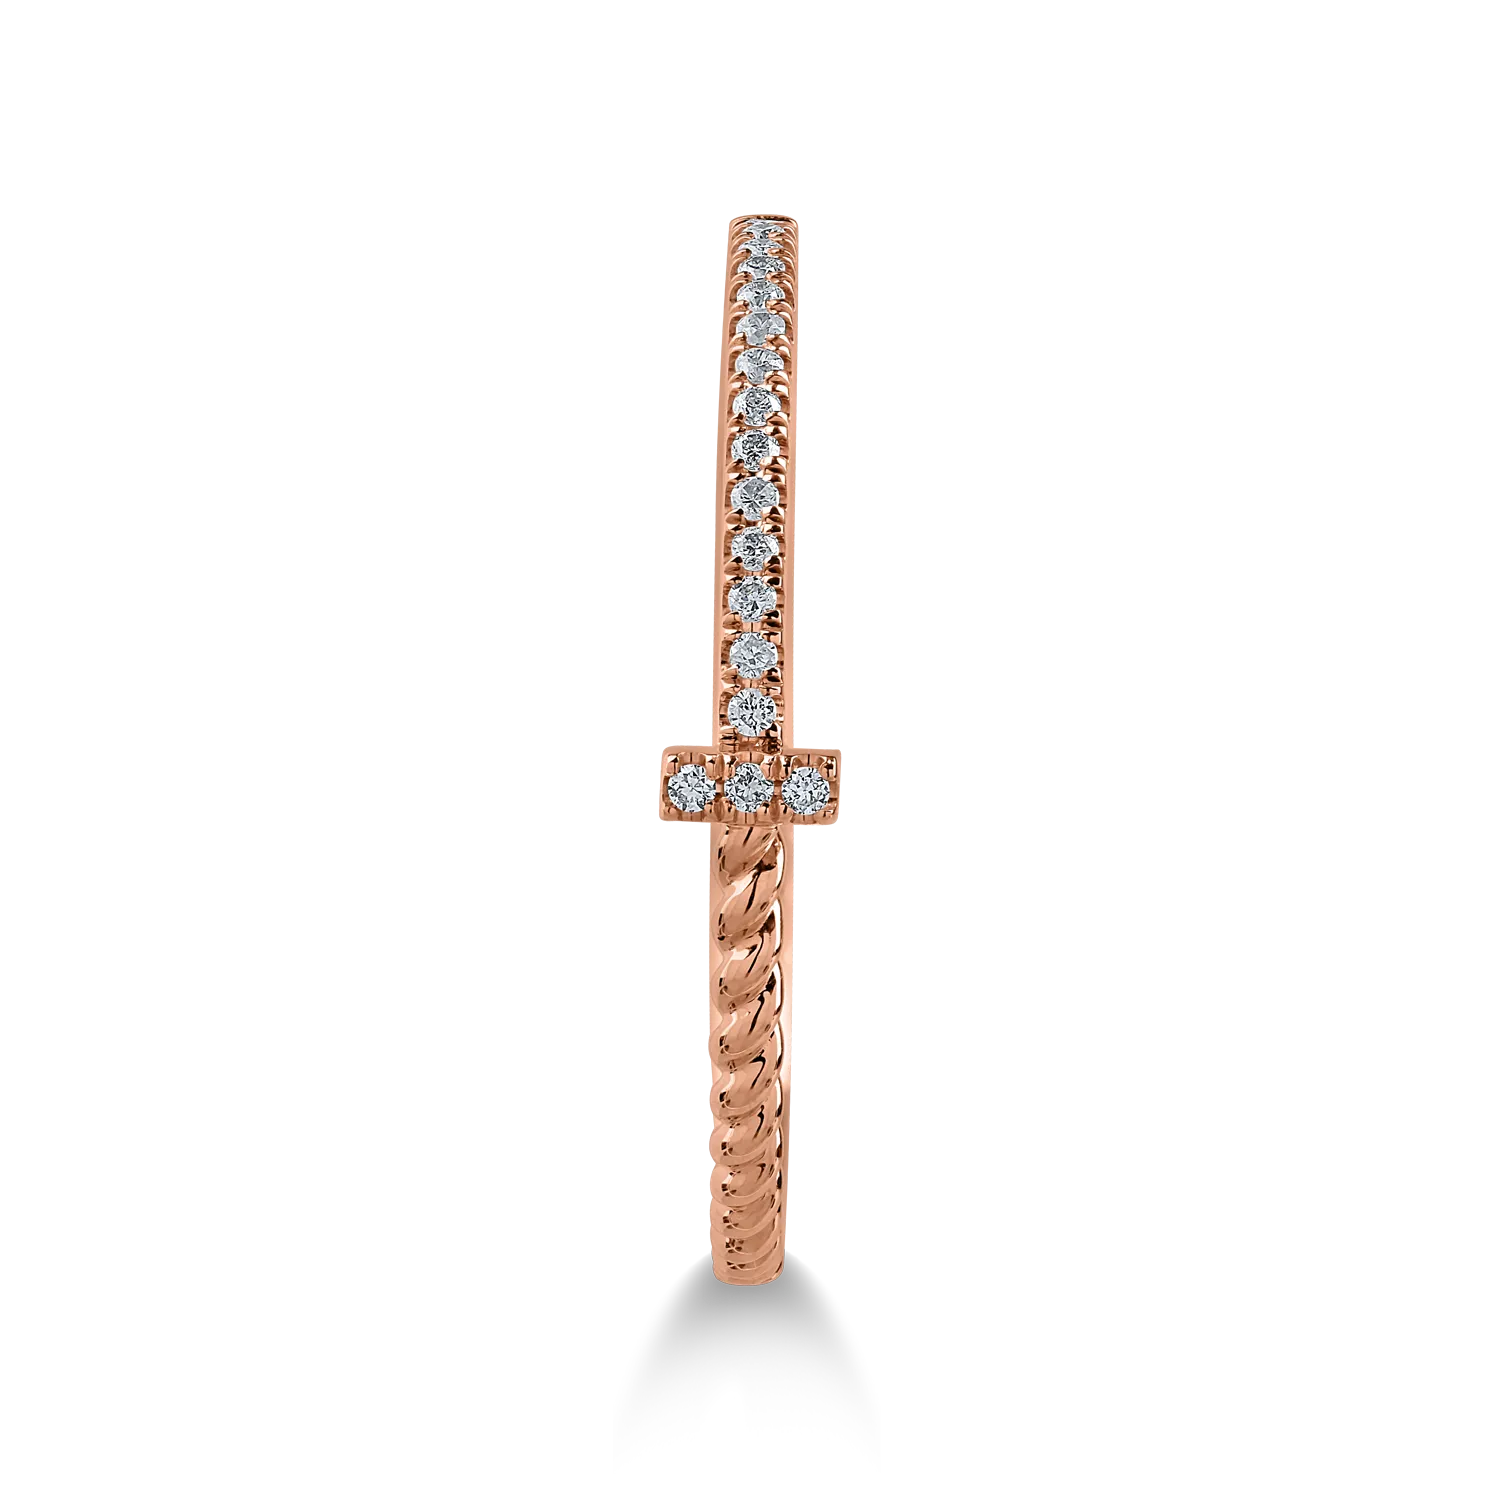 Half eternity ring in rose gold with 0.05ct diamonds